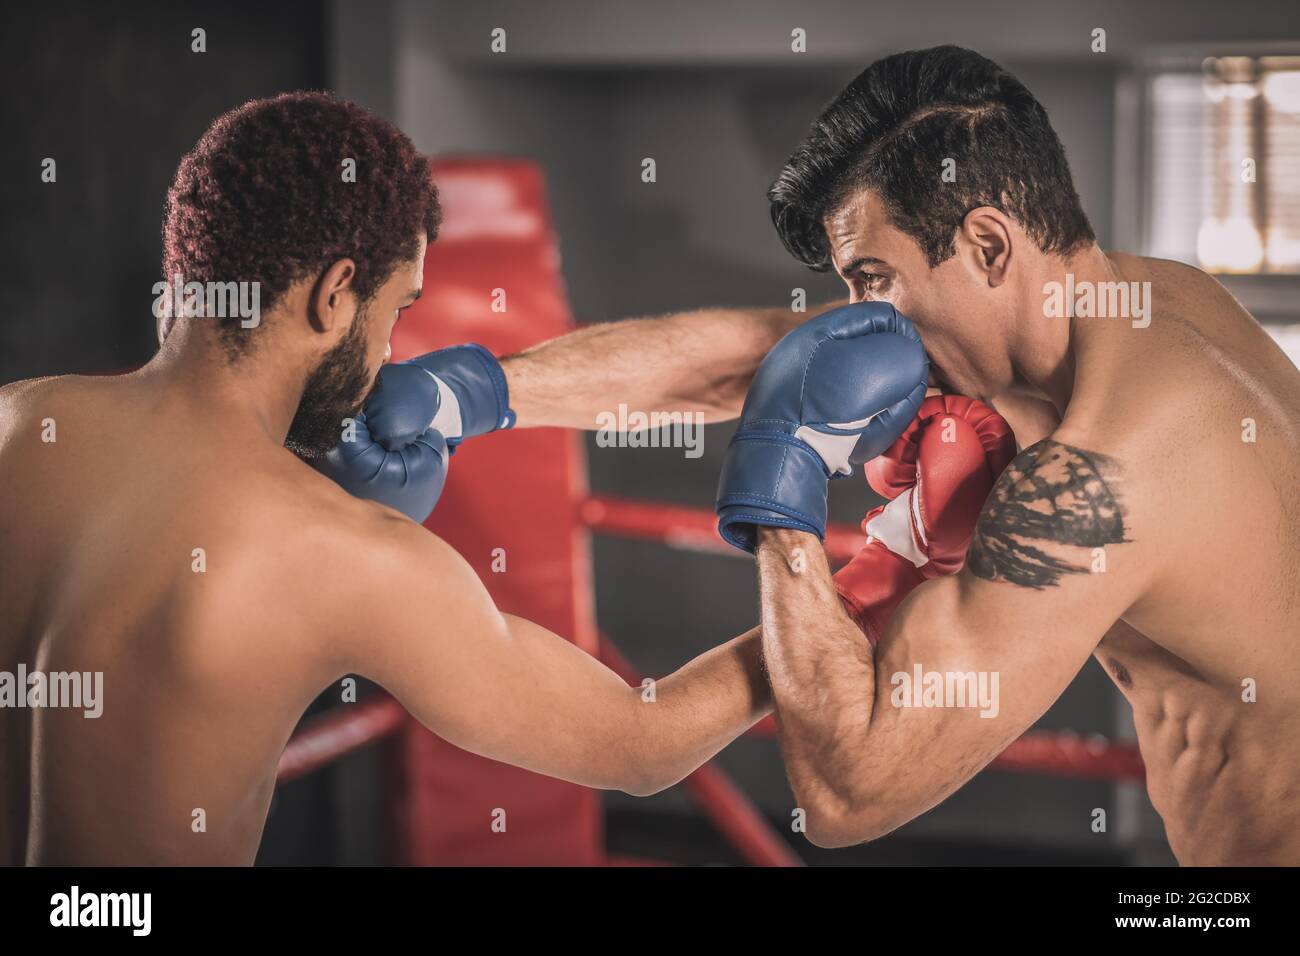 Two rivals having a fight on a boxing ring and looking aggressive Stock Photo